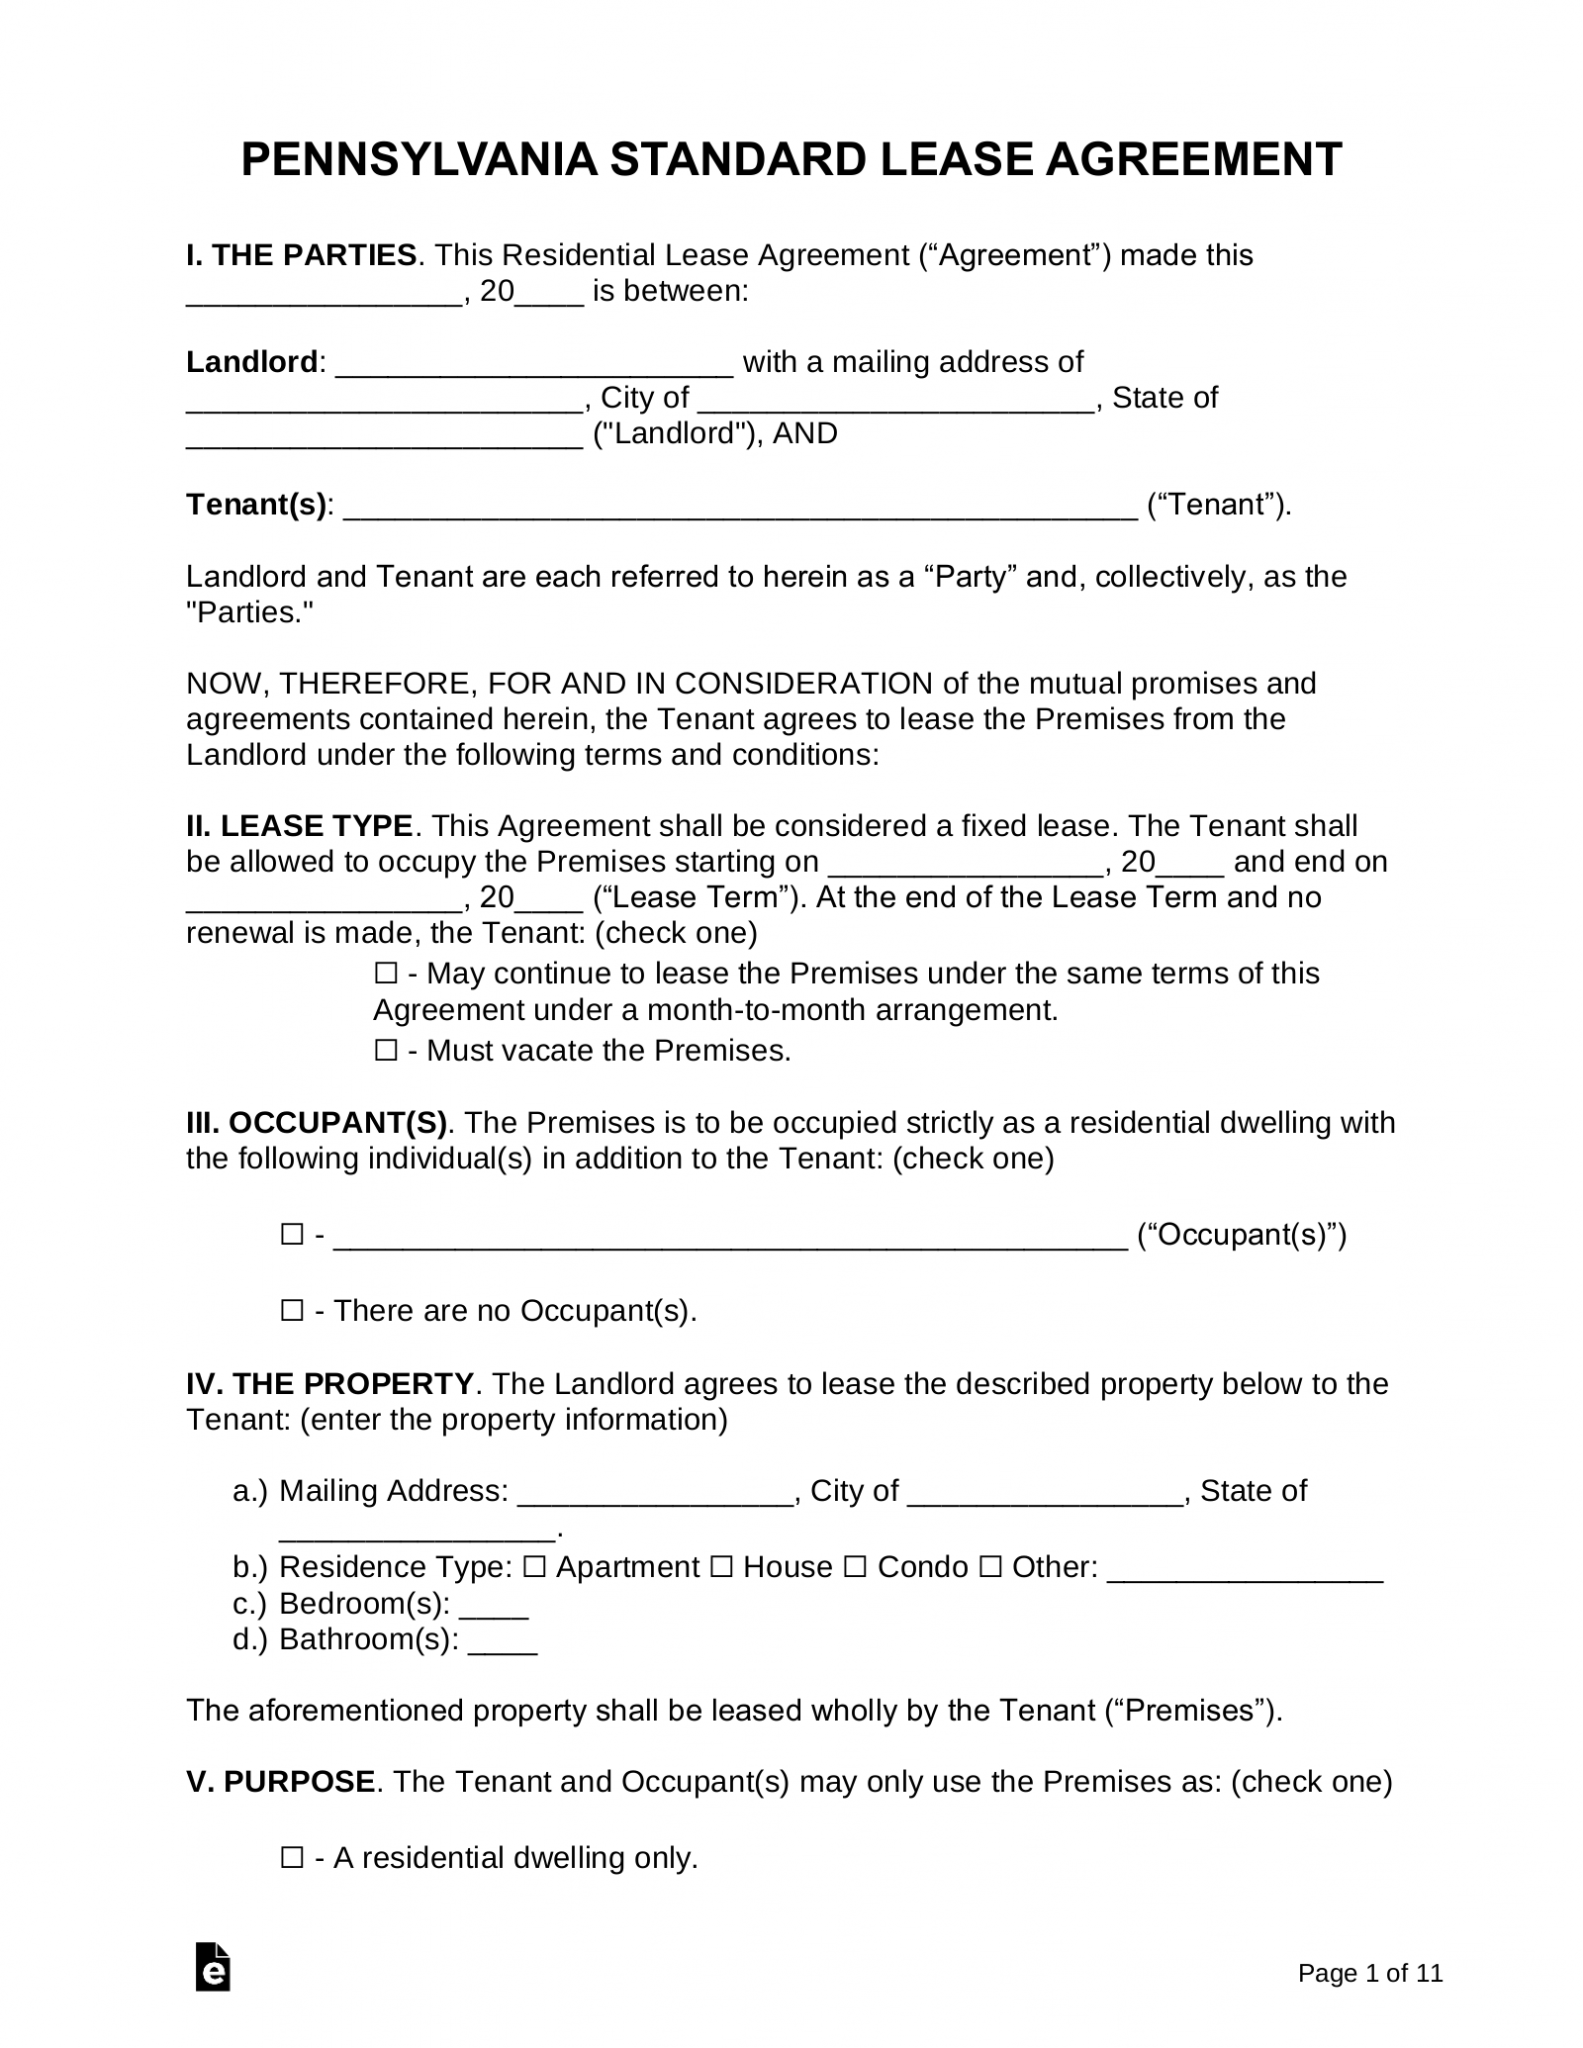 free-pennsylvania-standard-residential-lease-agreement-form-pdf-word-eforms